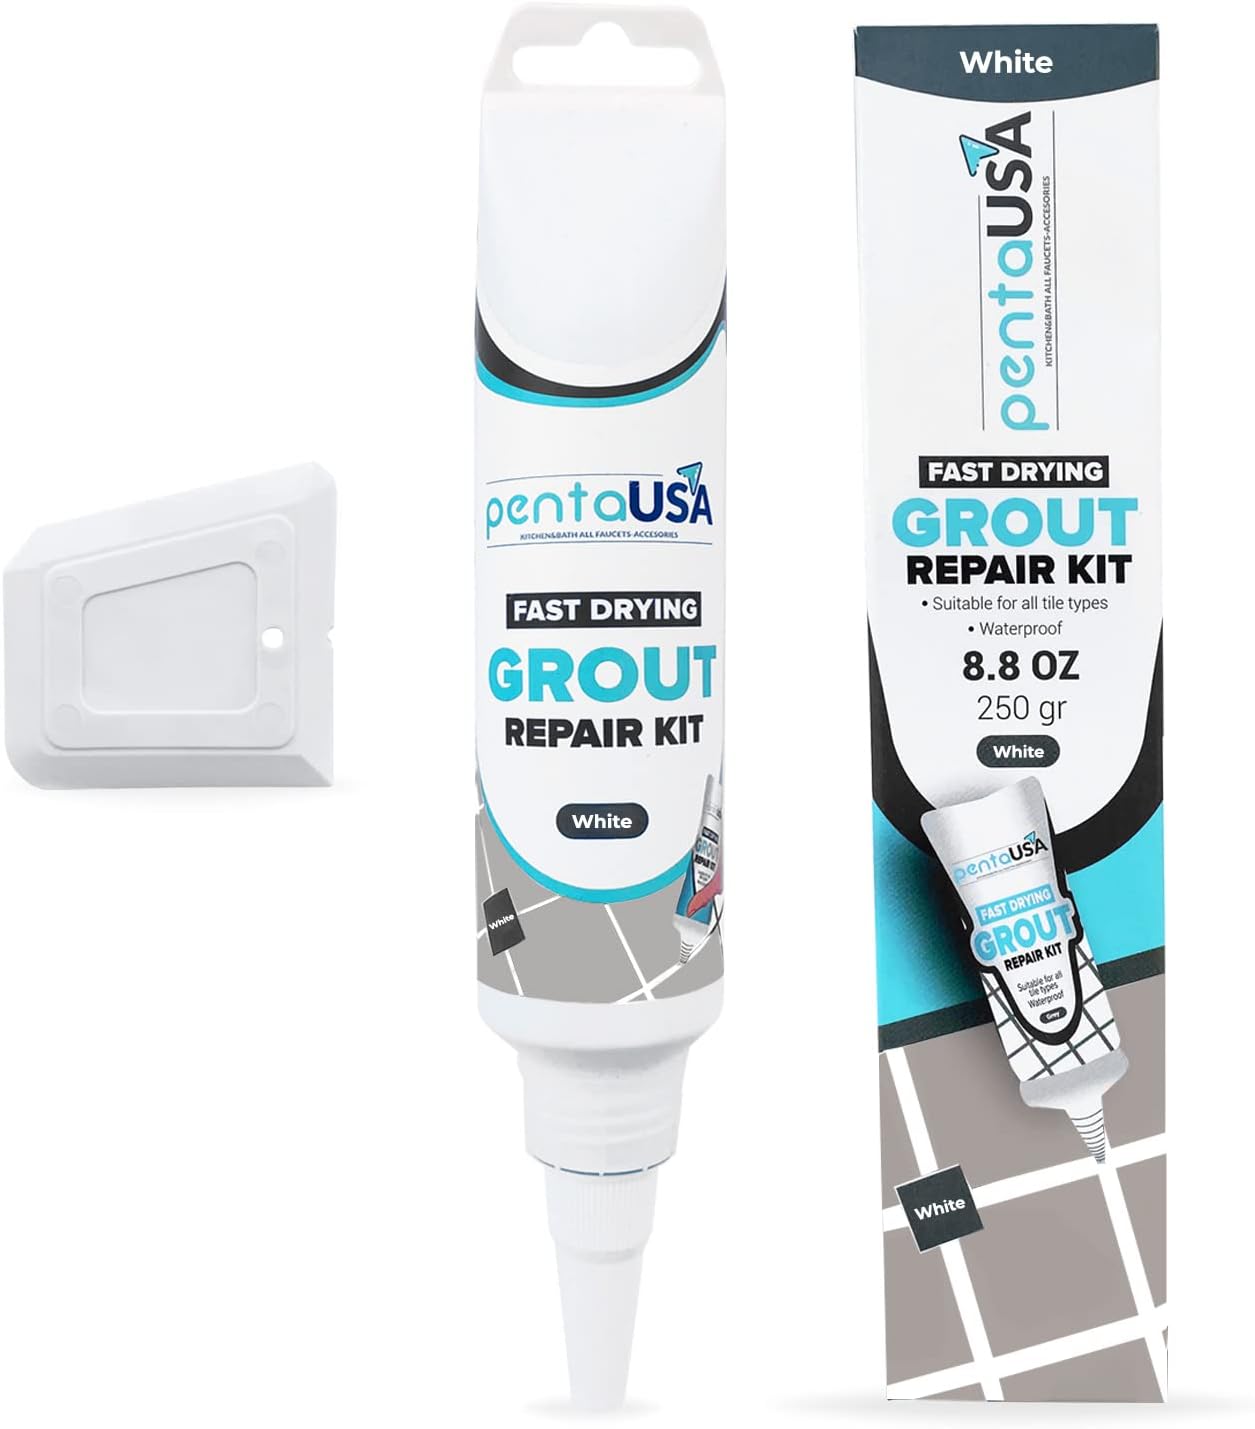 PentaUSA Tile Grout - White Grout Filler Repairs [...]